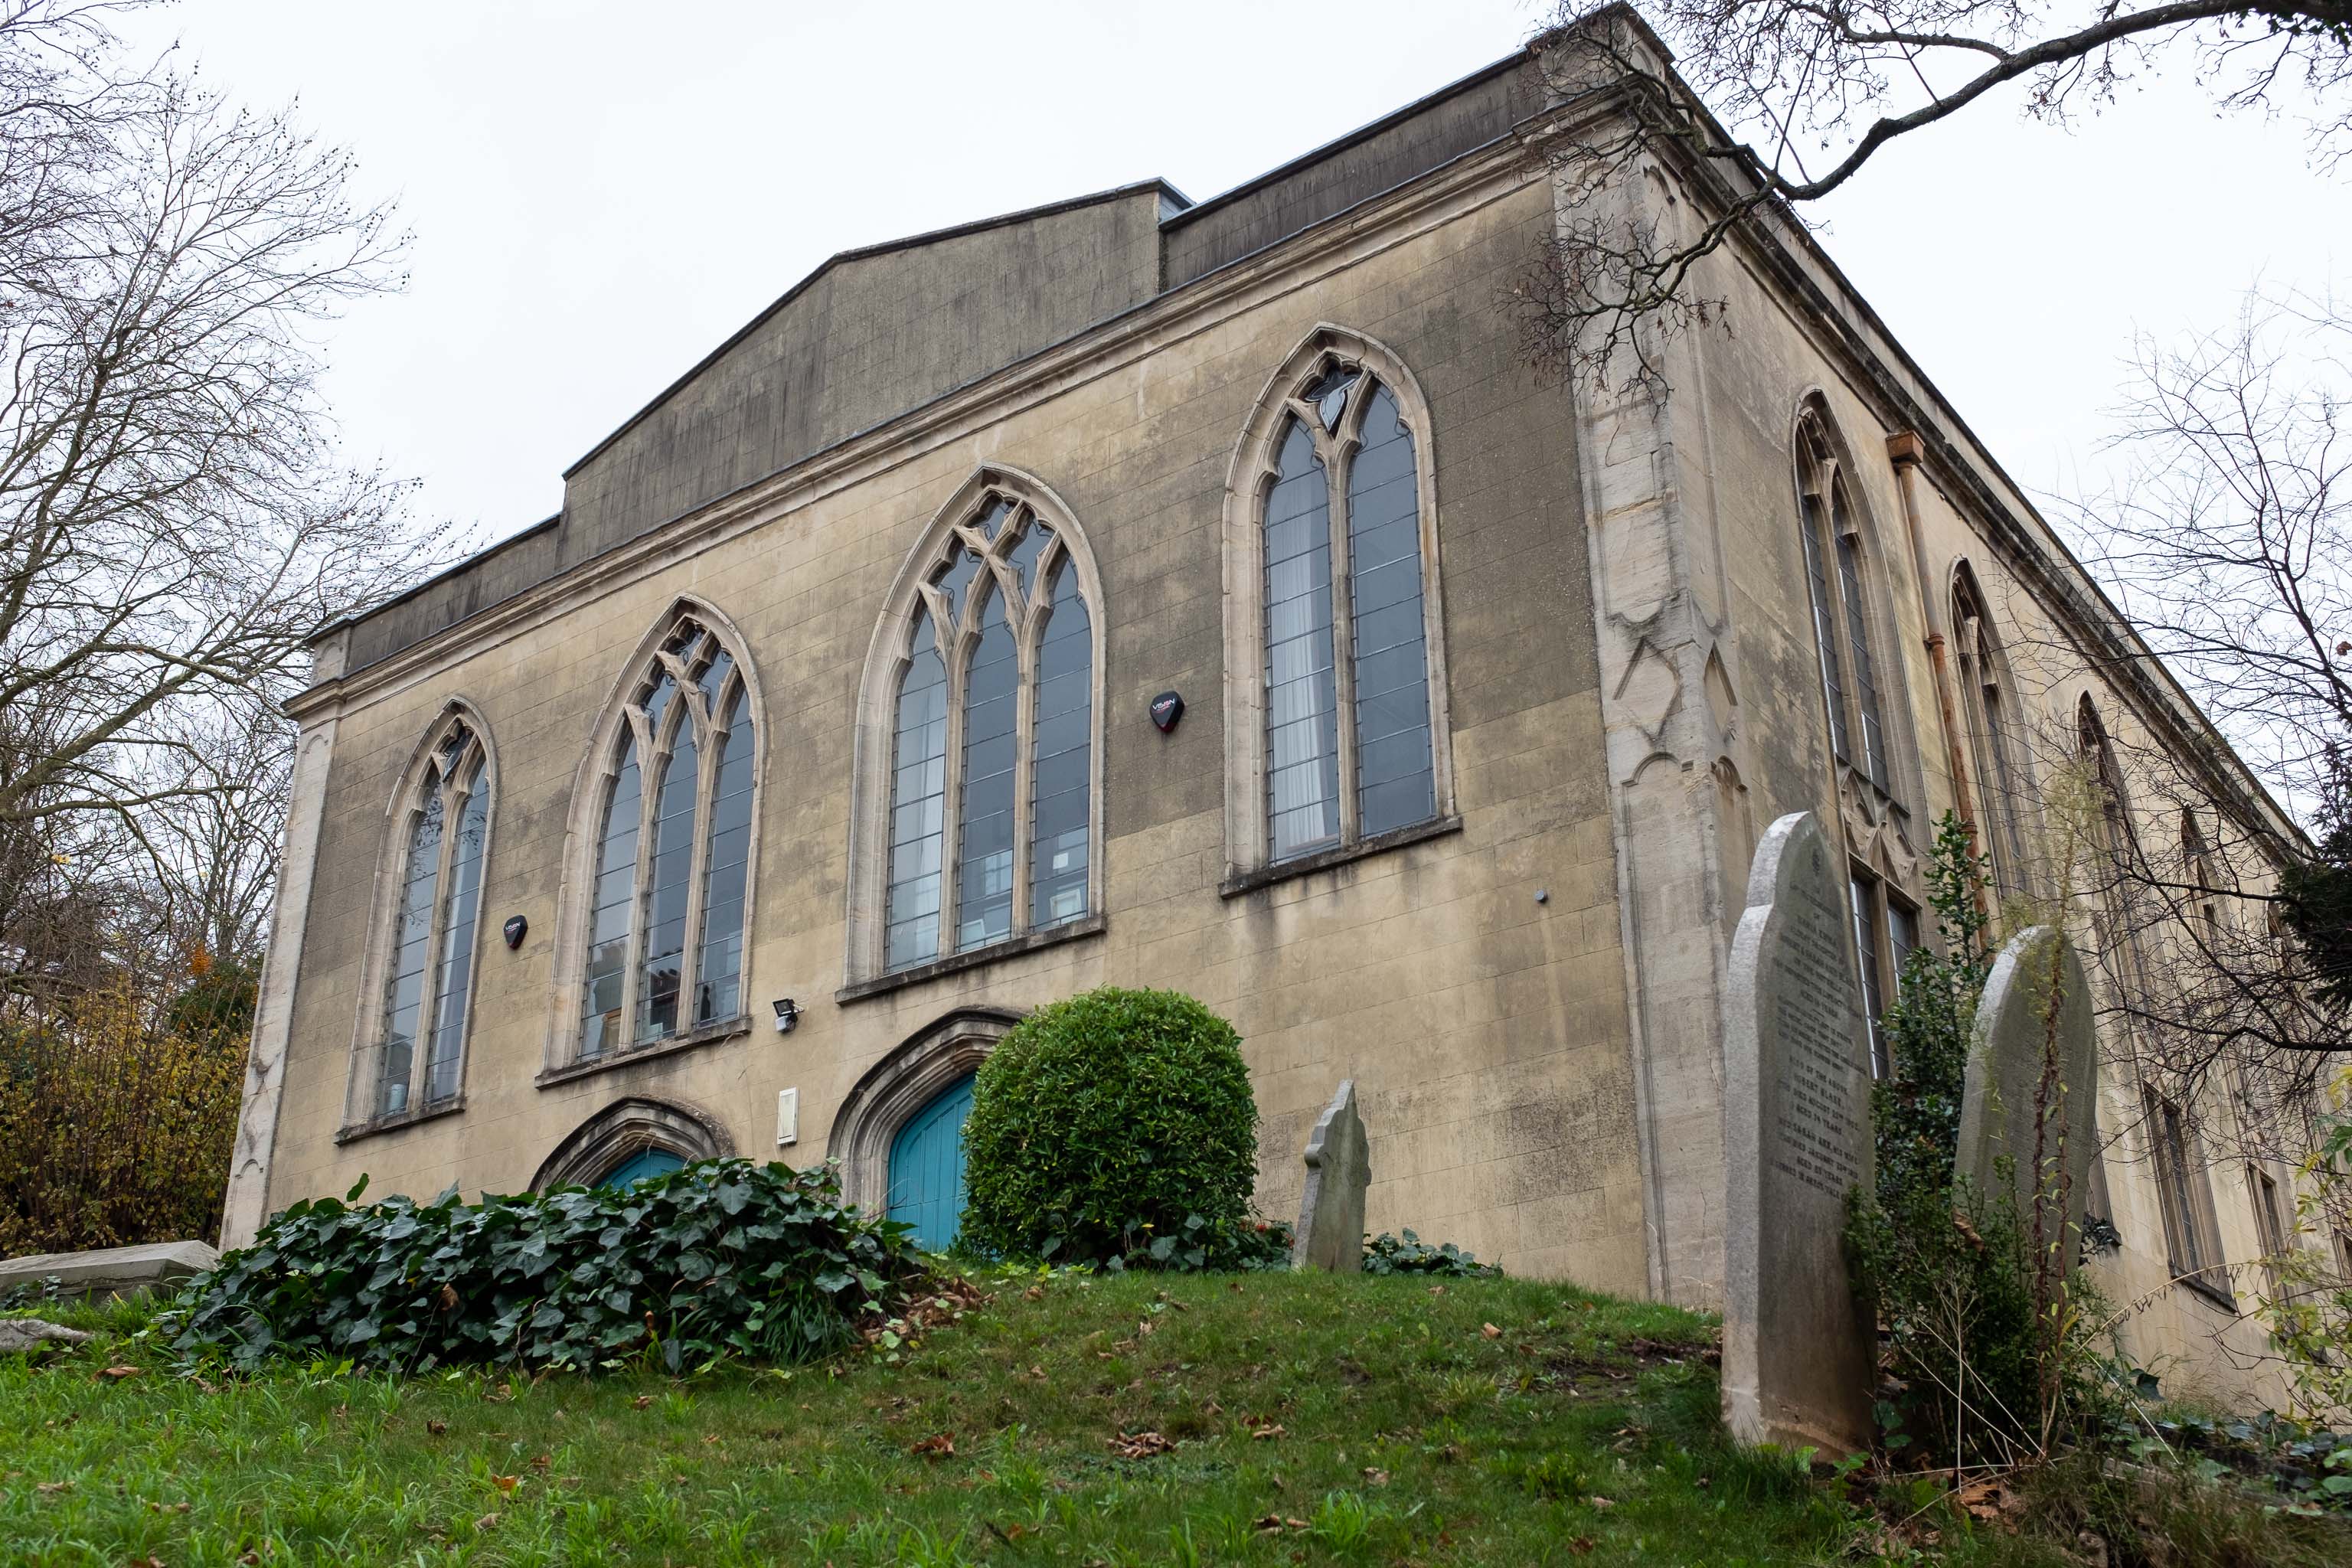 Hope Chapel
There's a lot of Hope in Hotwells, not least because of benefactor Lady Henrietta Hope. Hope Chapel was completed posthumously in her name after sh...